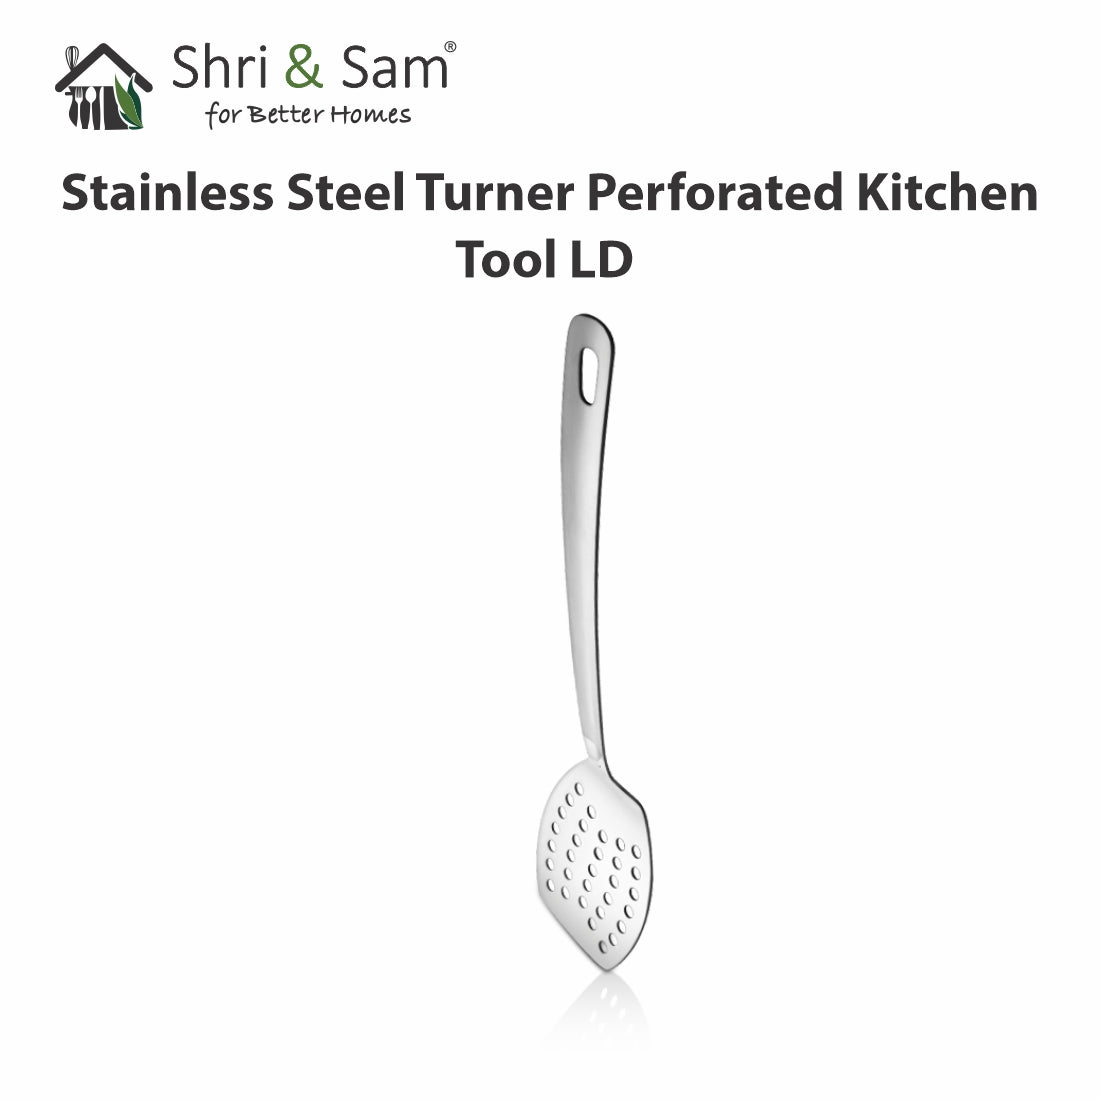 Stainless Steel Turner Perforated Kitchen Tool LD